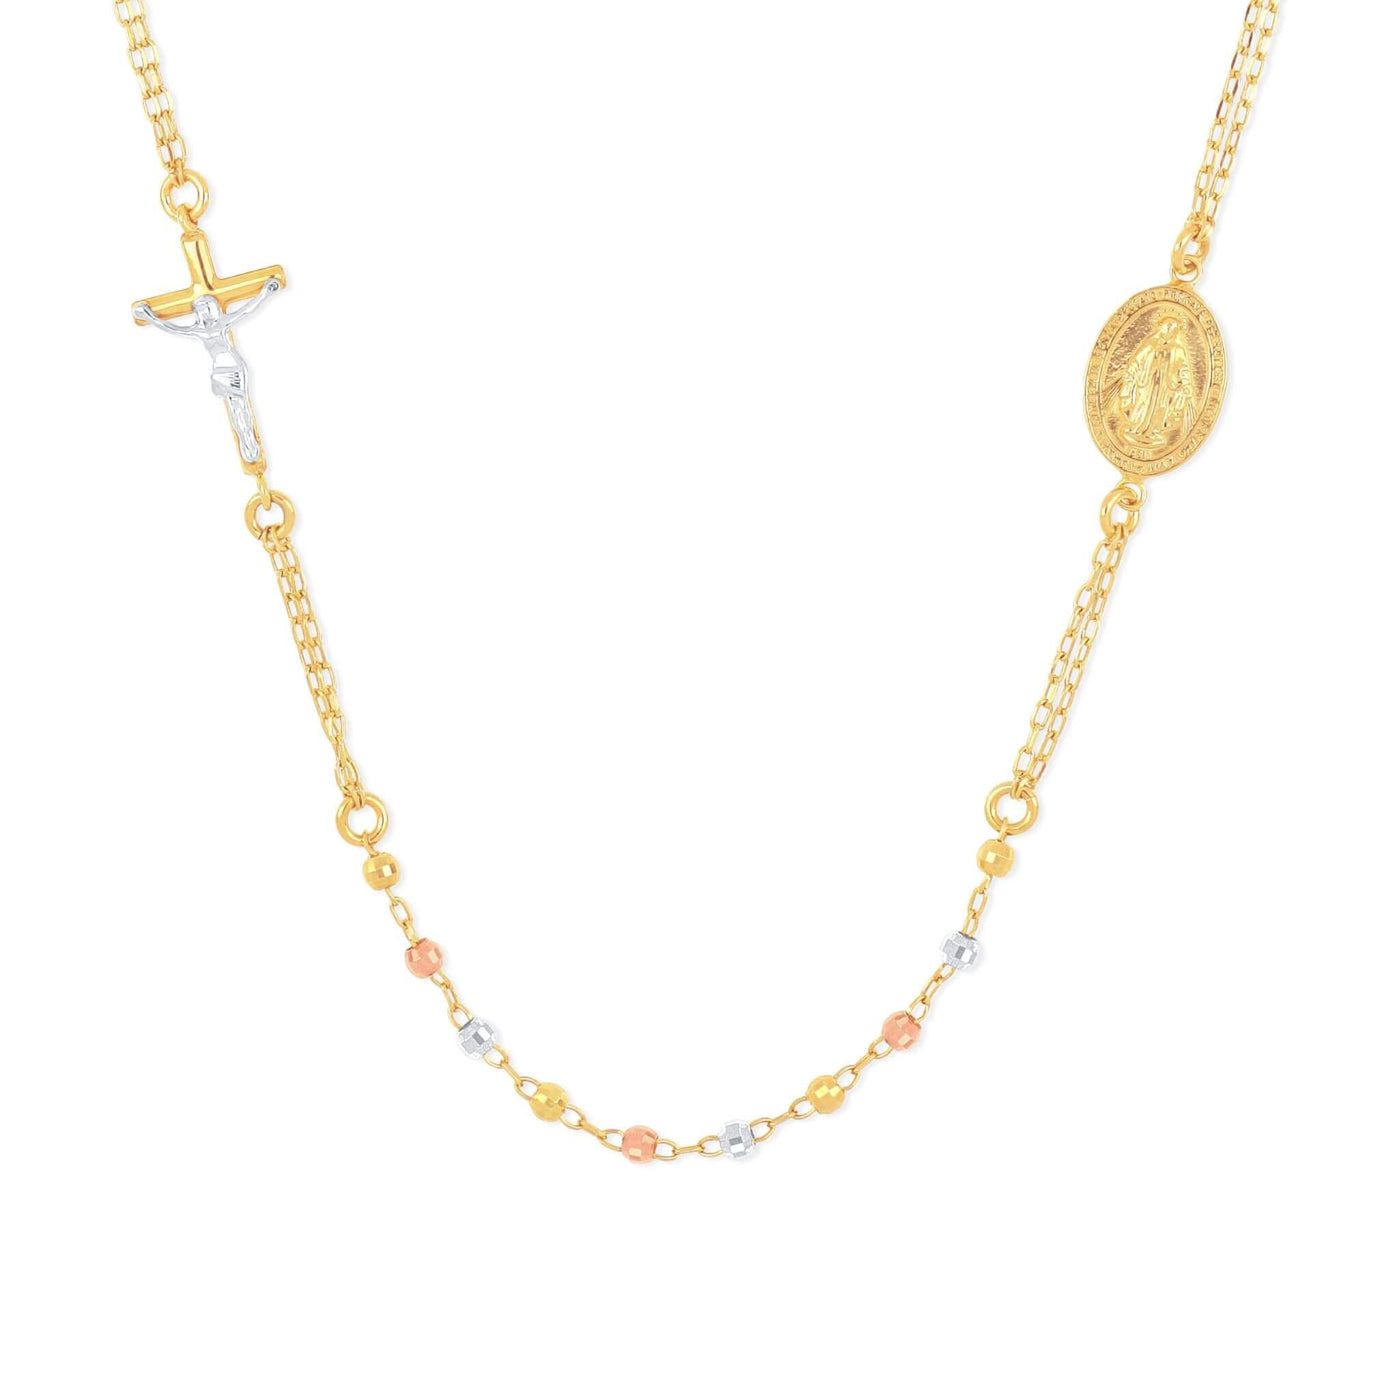 In-Line Faith Miraculous Necklace - Gloria Jewels